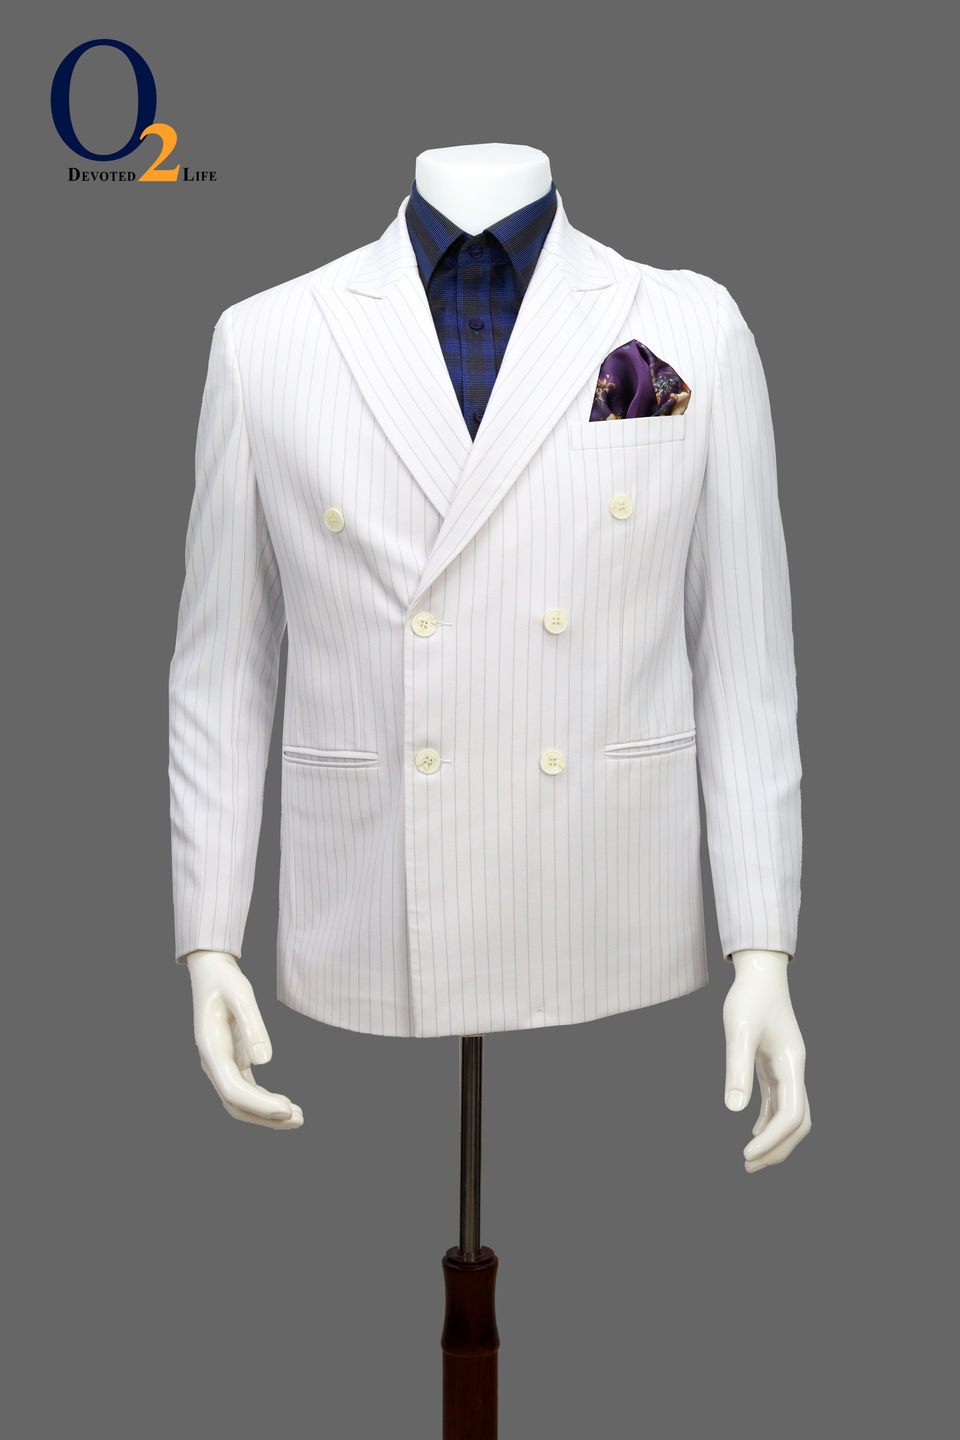 Sharp Luxurious Men's Double-Breasted White Suit collection